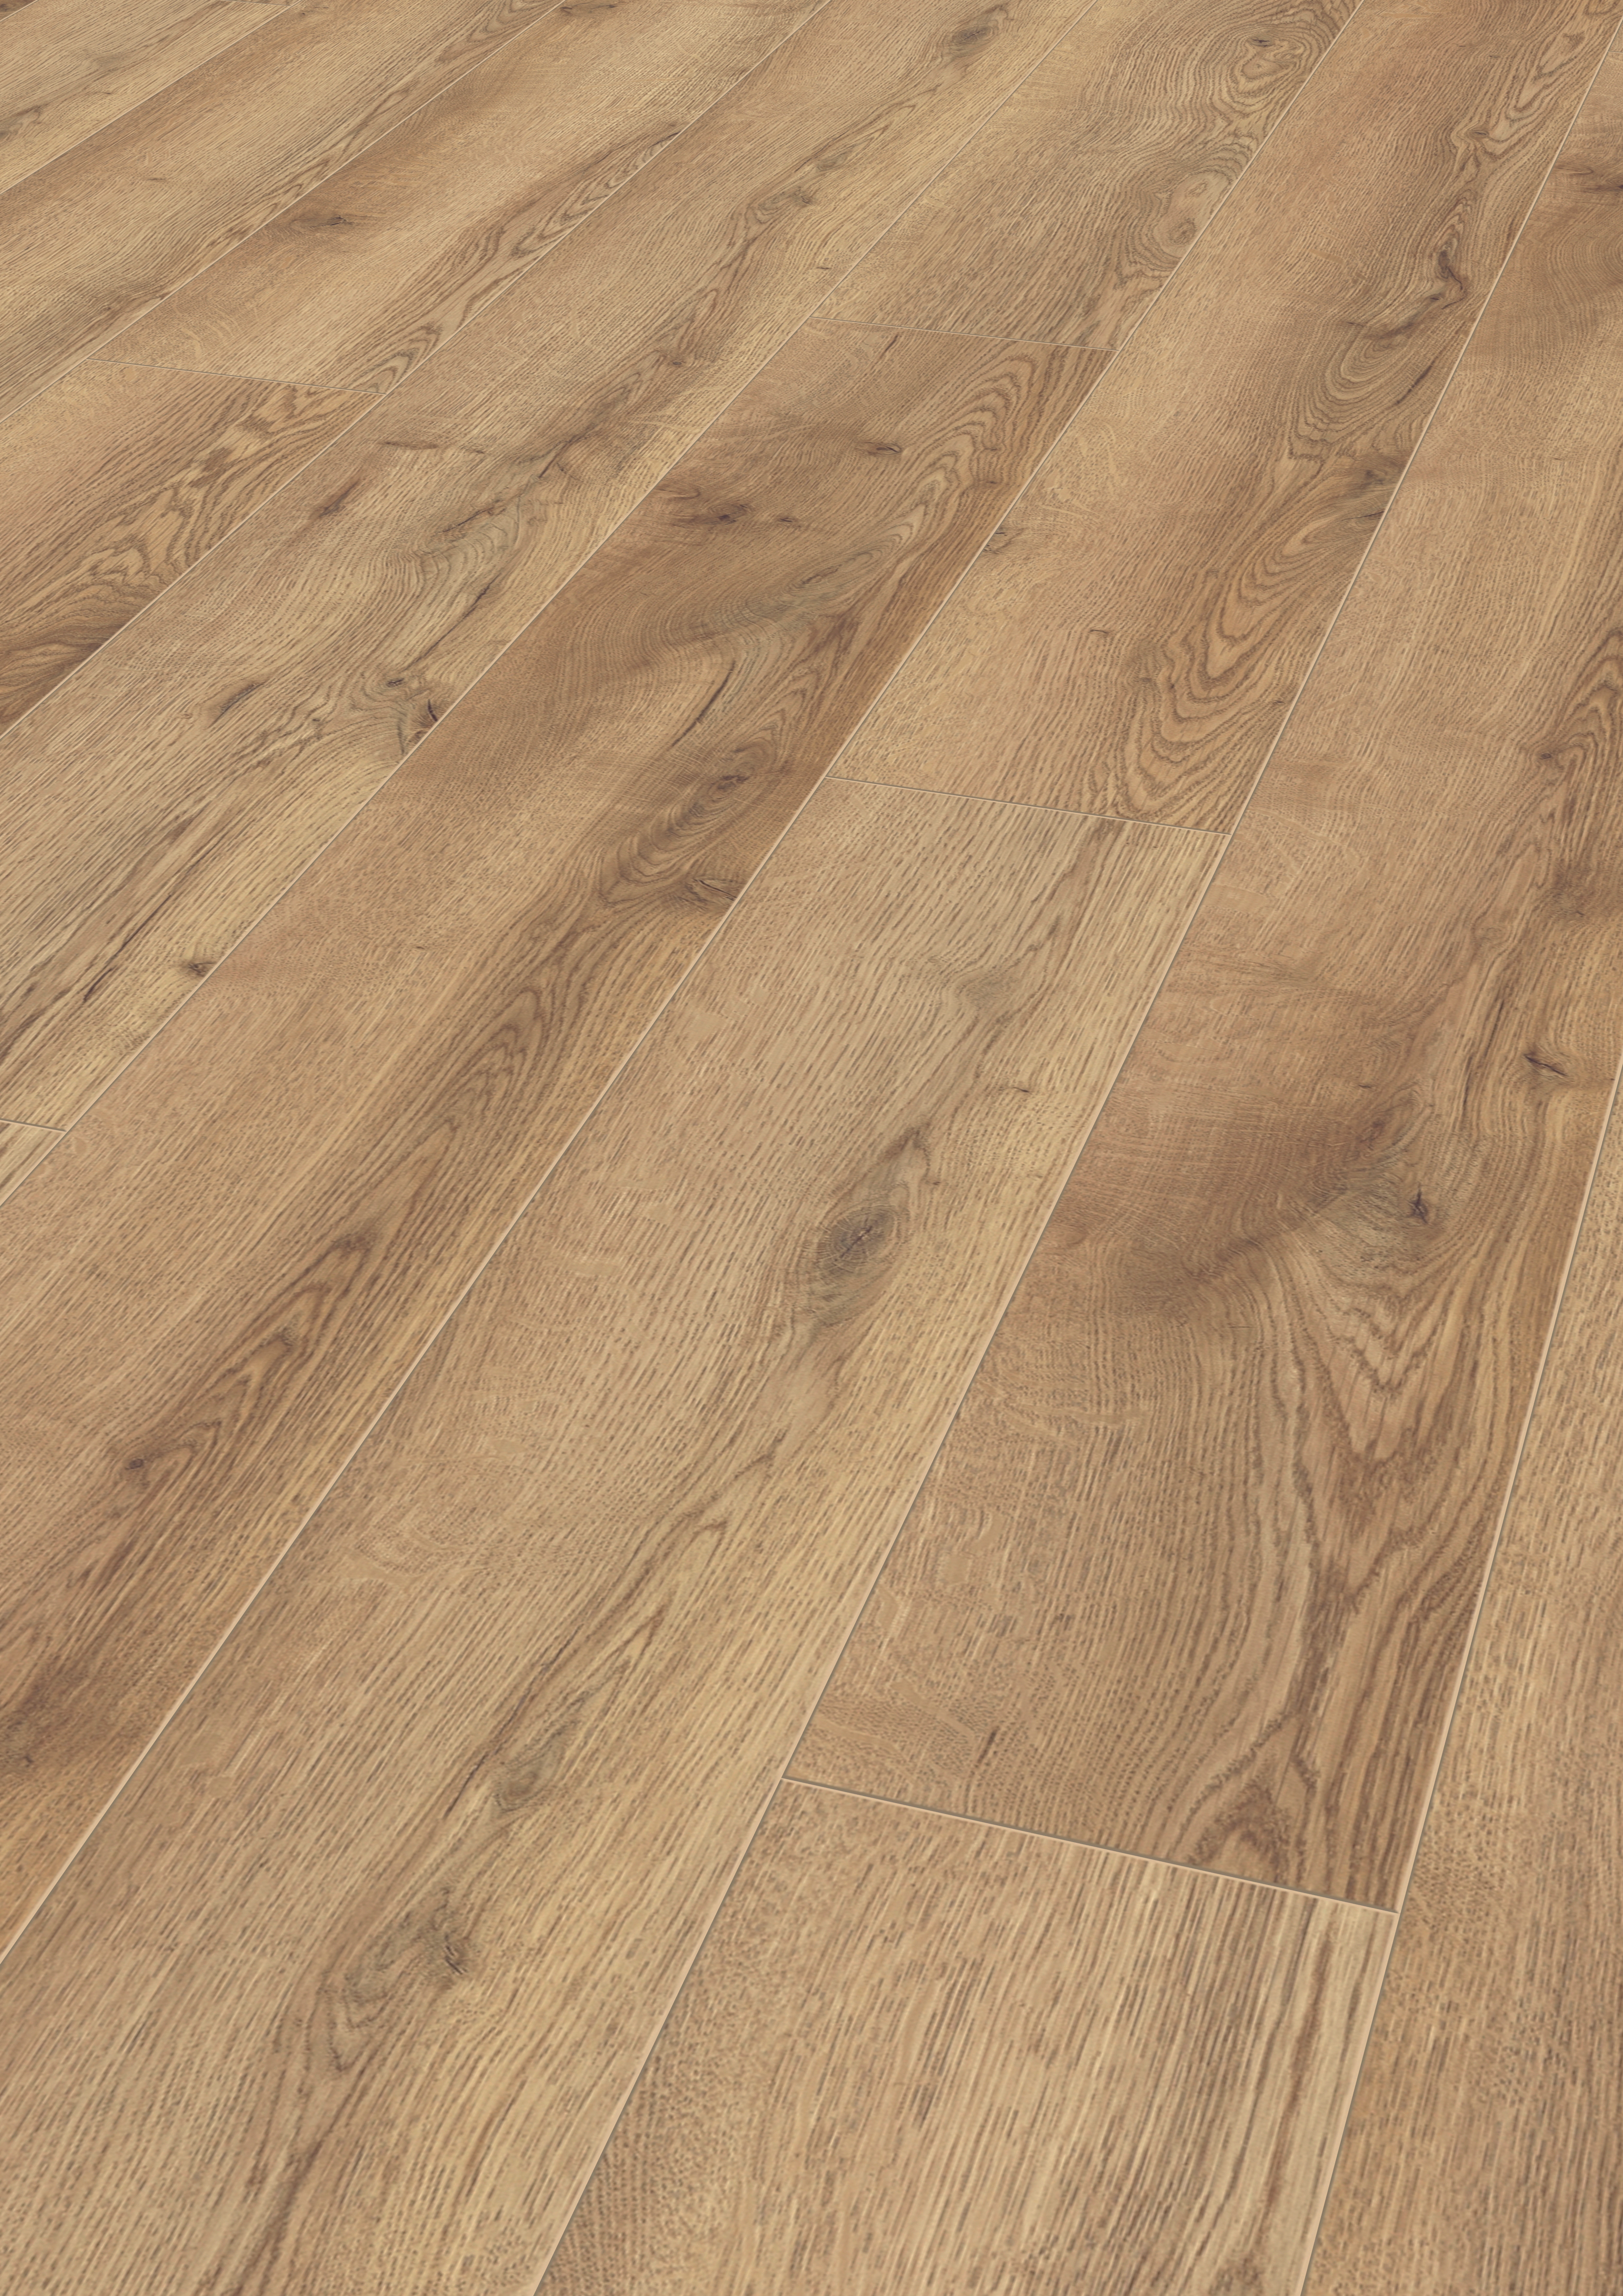 30 Unique Most Popular Hardwood Flooring 2017 2024 free download most popular hardwood flooring 2017 of mammut laminate flooring in country house plank style kronotex throughout download picture amp